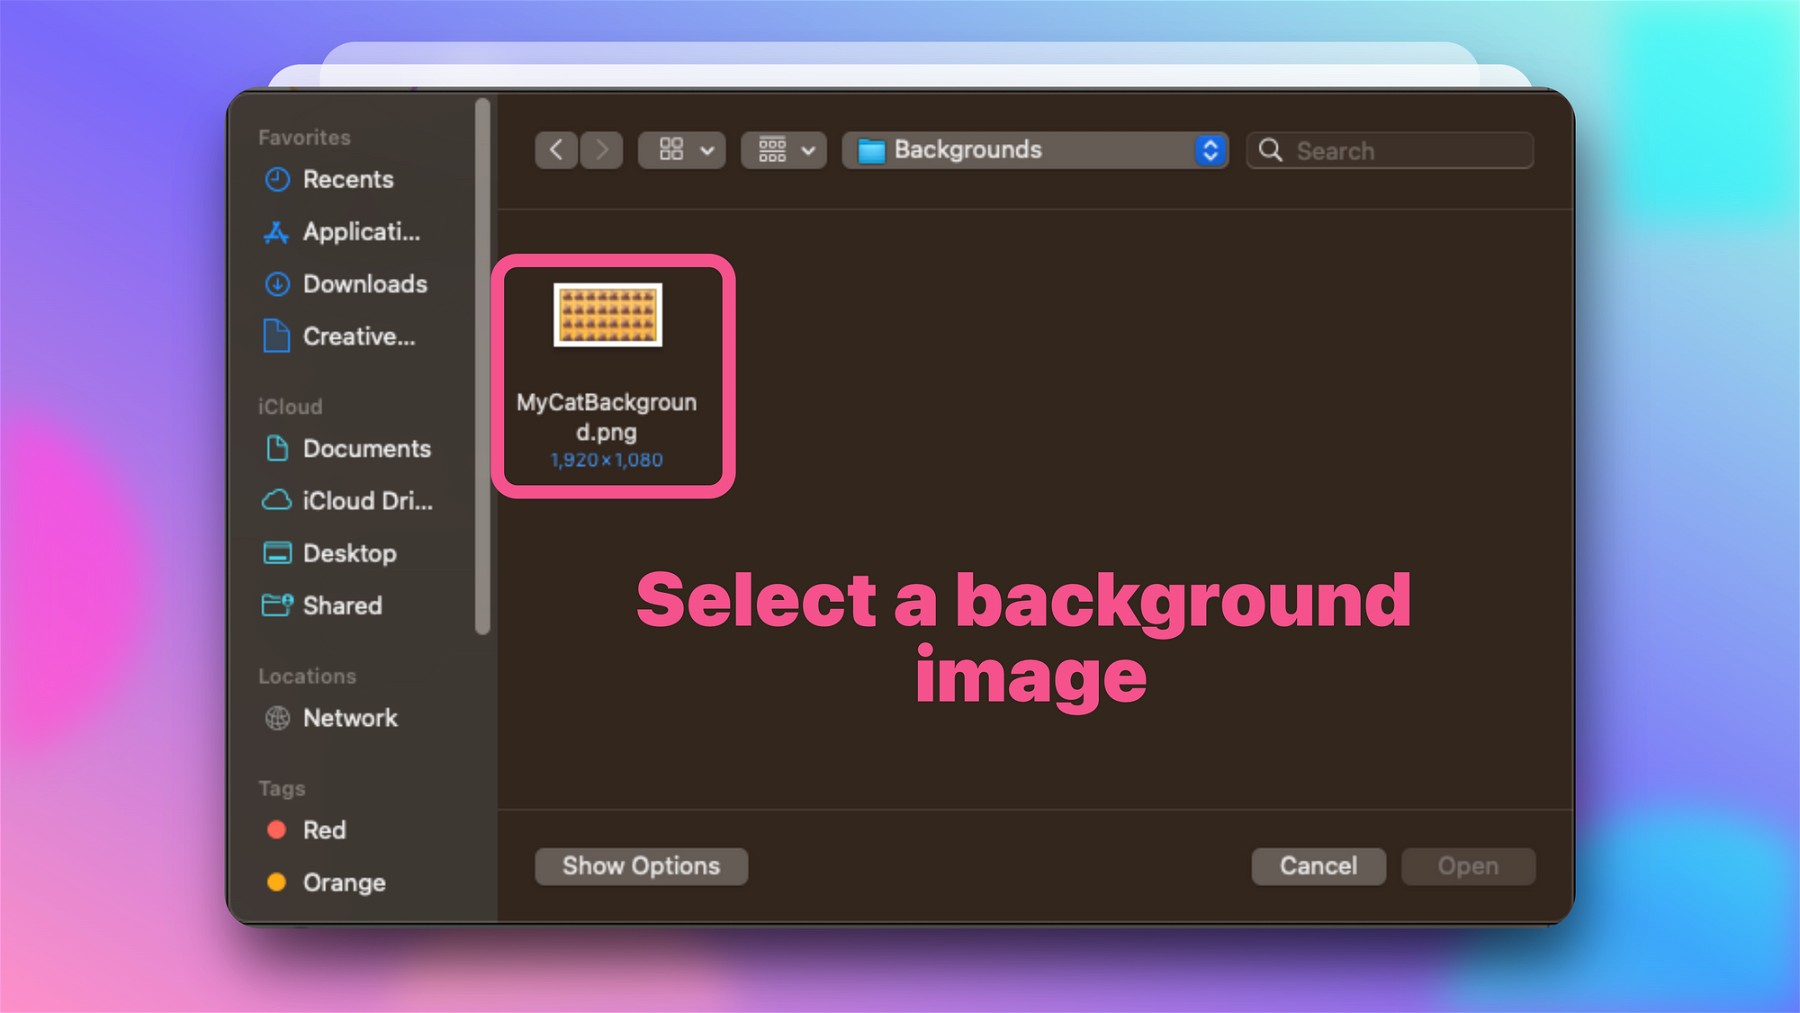 The background uploader is easy to use. Select the image option from the dropdown menu under background styling options. Then, choose your background from the files on your computer to upload it to your form!